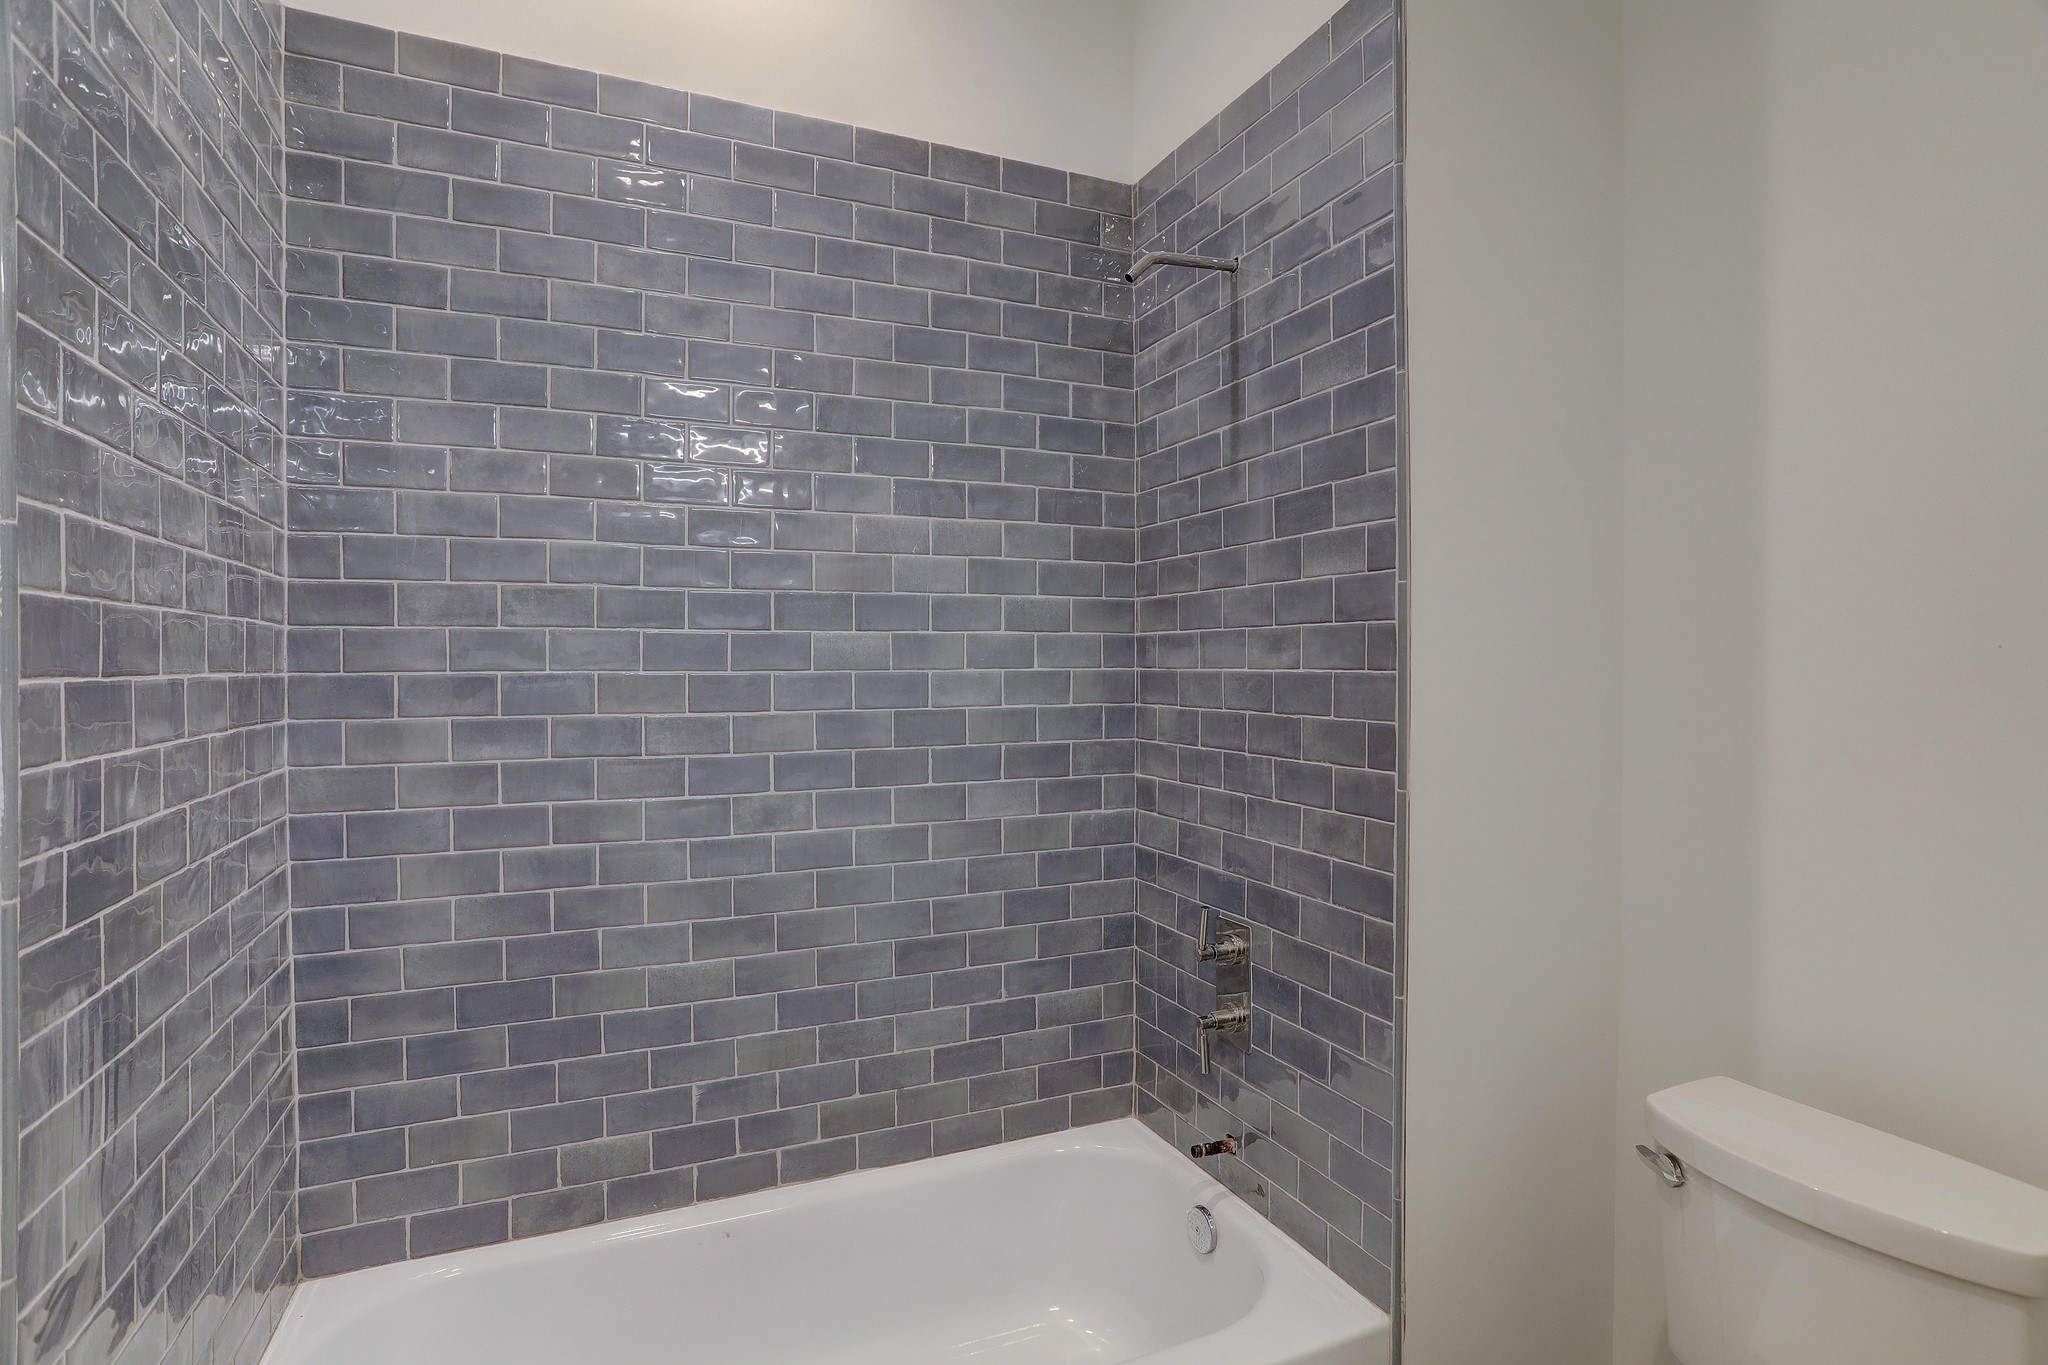 Handmade Italian Misty blue subway tile compliments the tiled floor in the en suite guest bath off the guestroom with the treetop balcony.